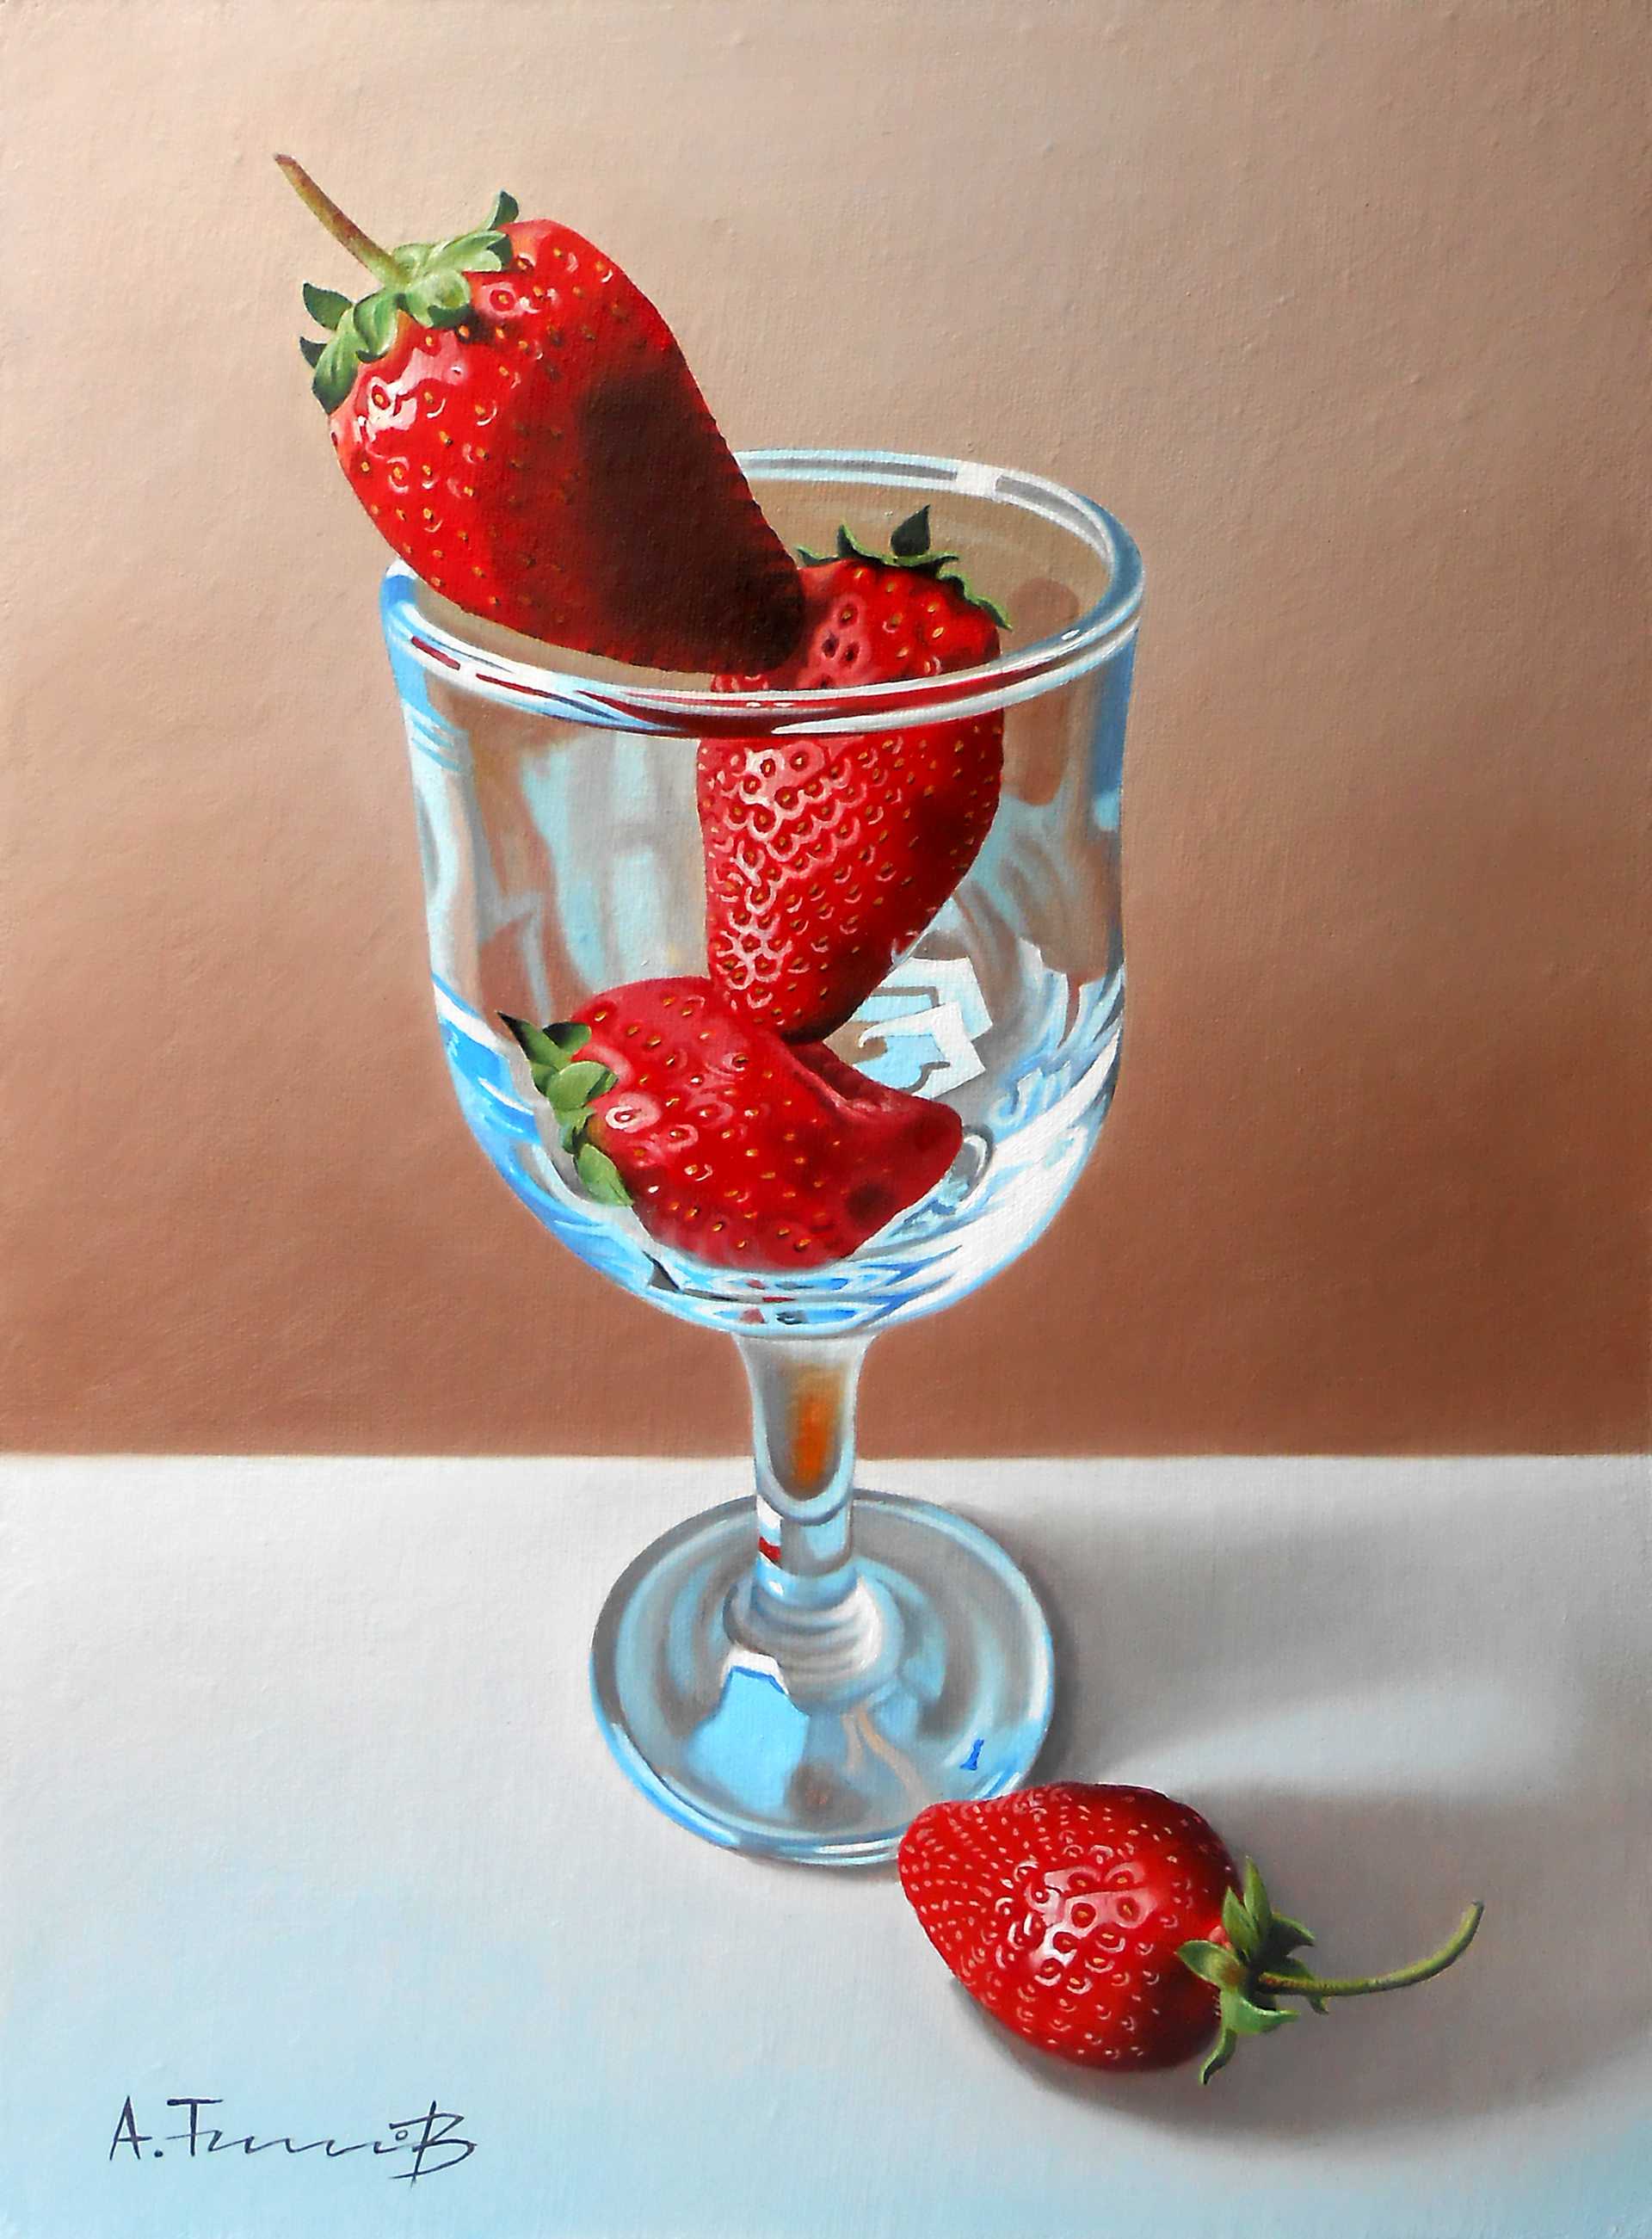 Still Life with Strawberries in a Glass